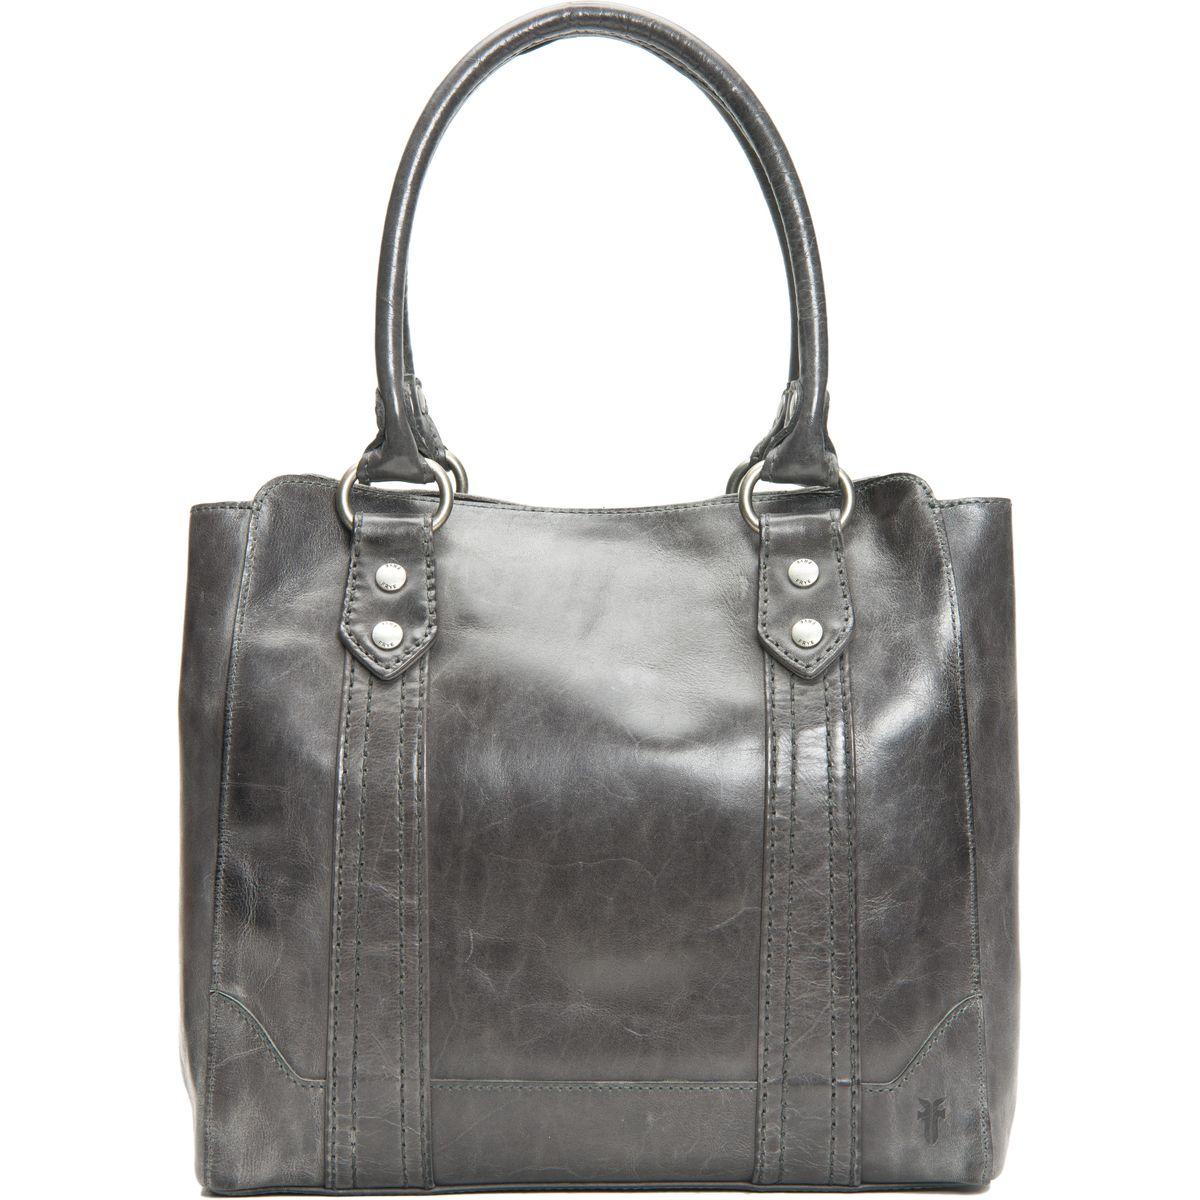 Frye Leather Melissa Tote in Carbon (Gray) - Lyst